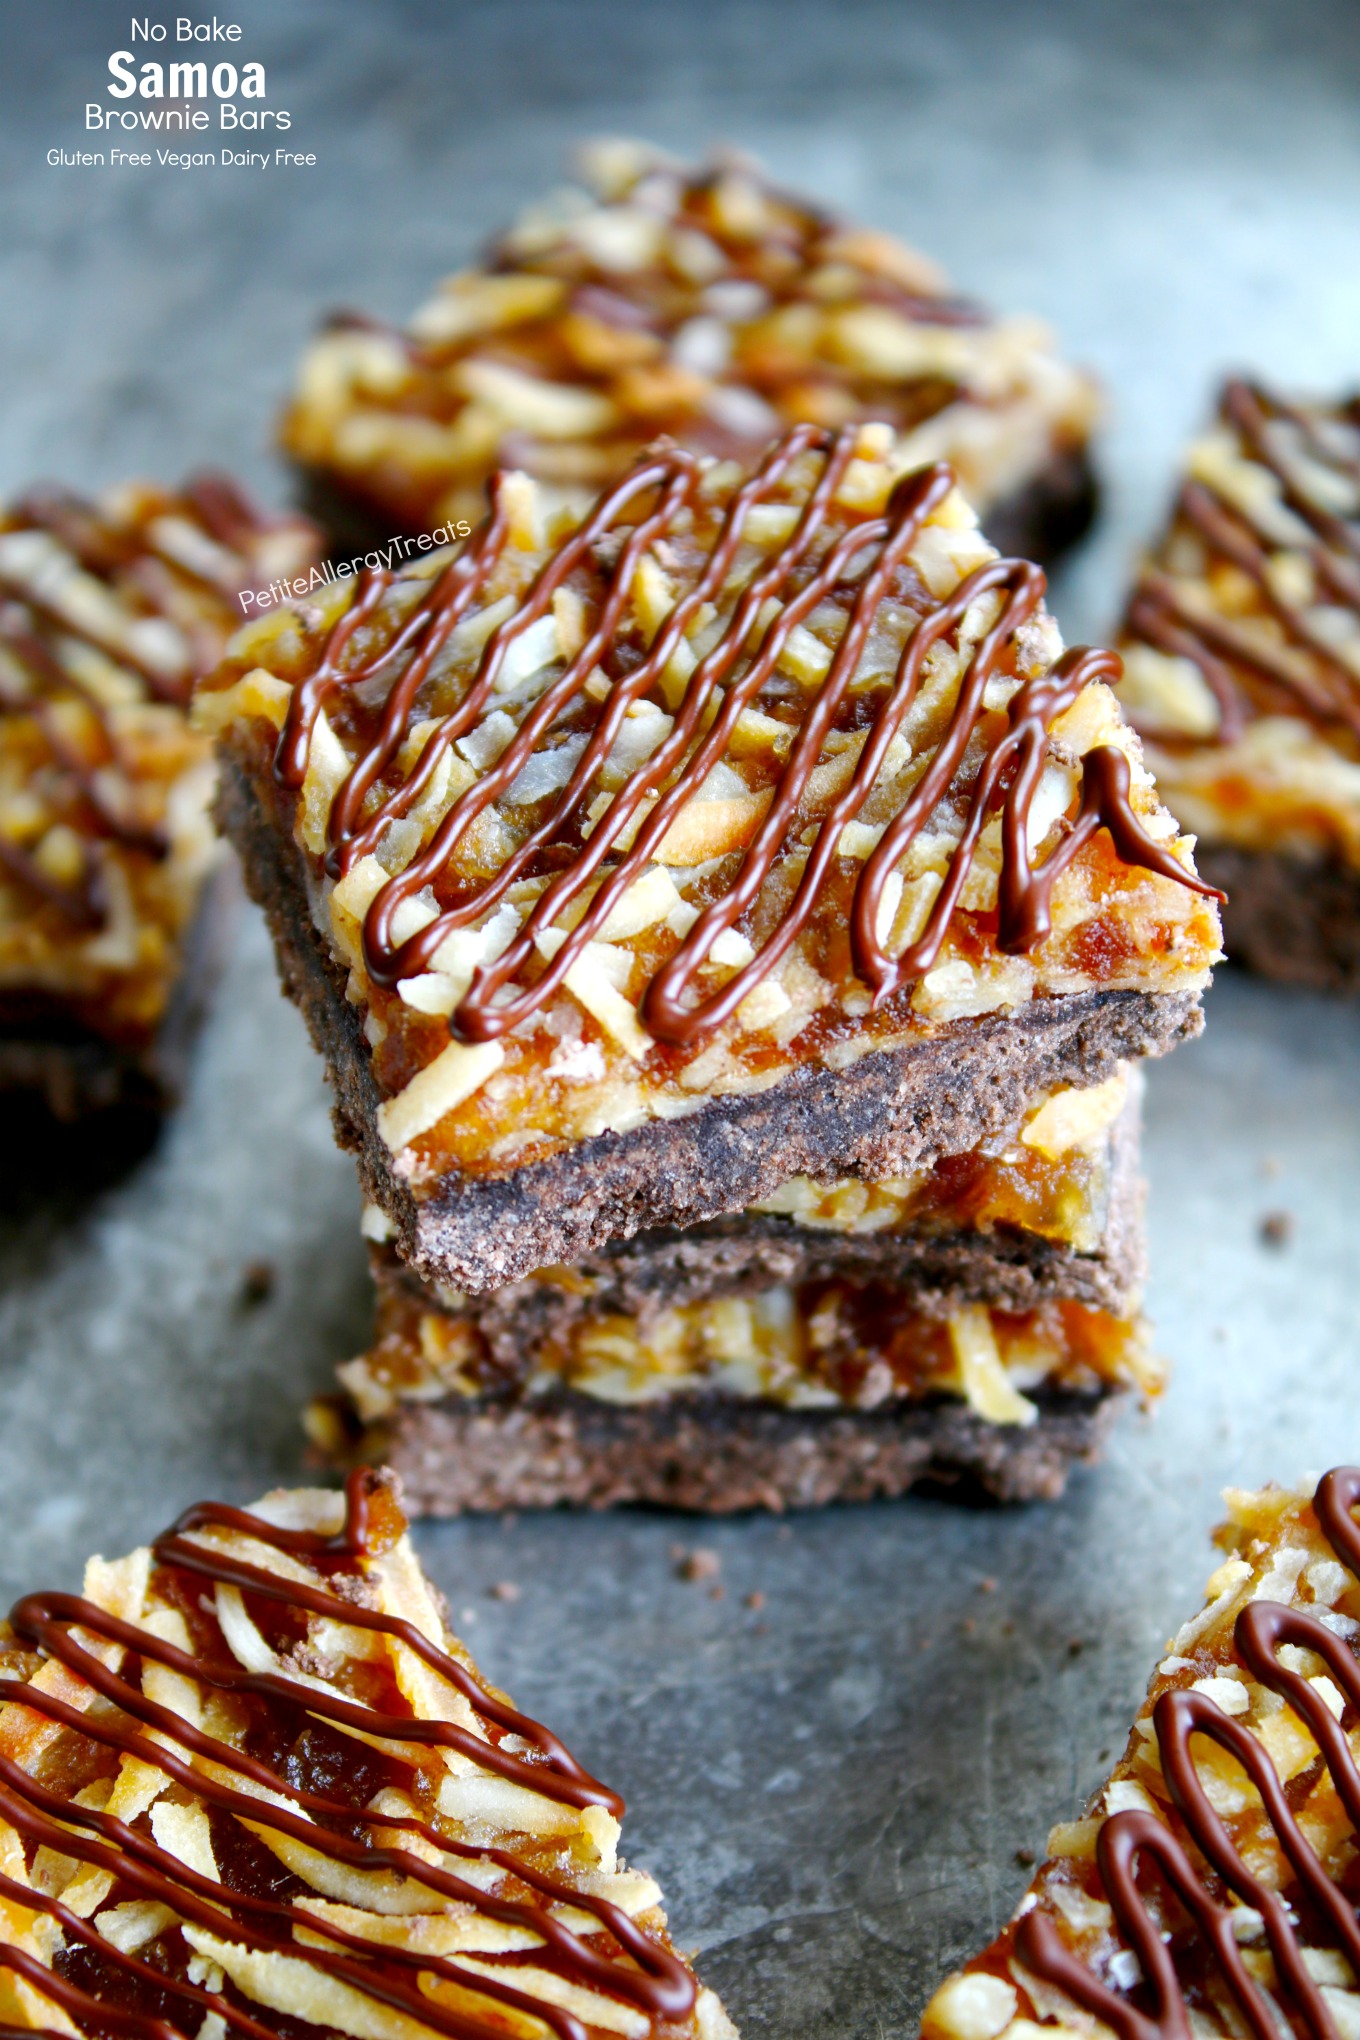 Gluten Free Samoa Brownie Bars Recipe (Vegan dairy free)- No bake Girl Scout toasted coconut caramel brownie bars! Food allergy friendly!